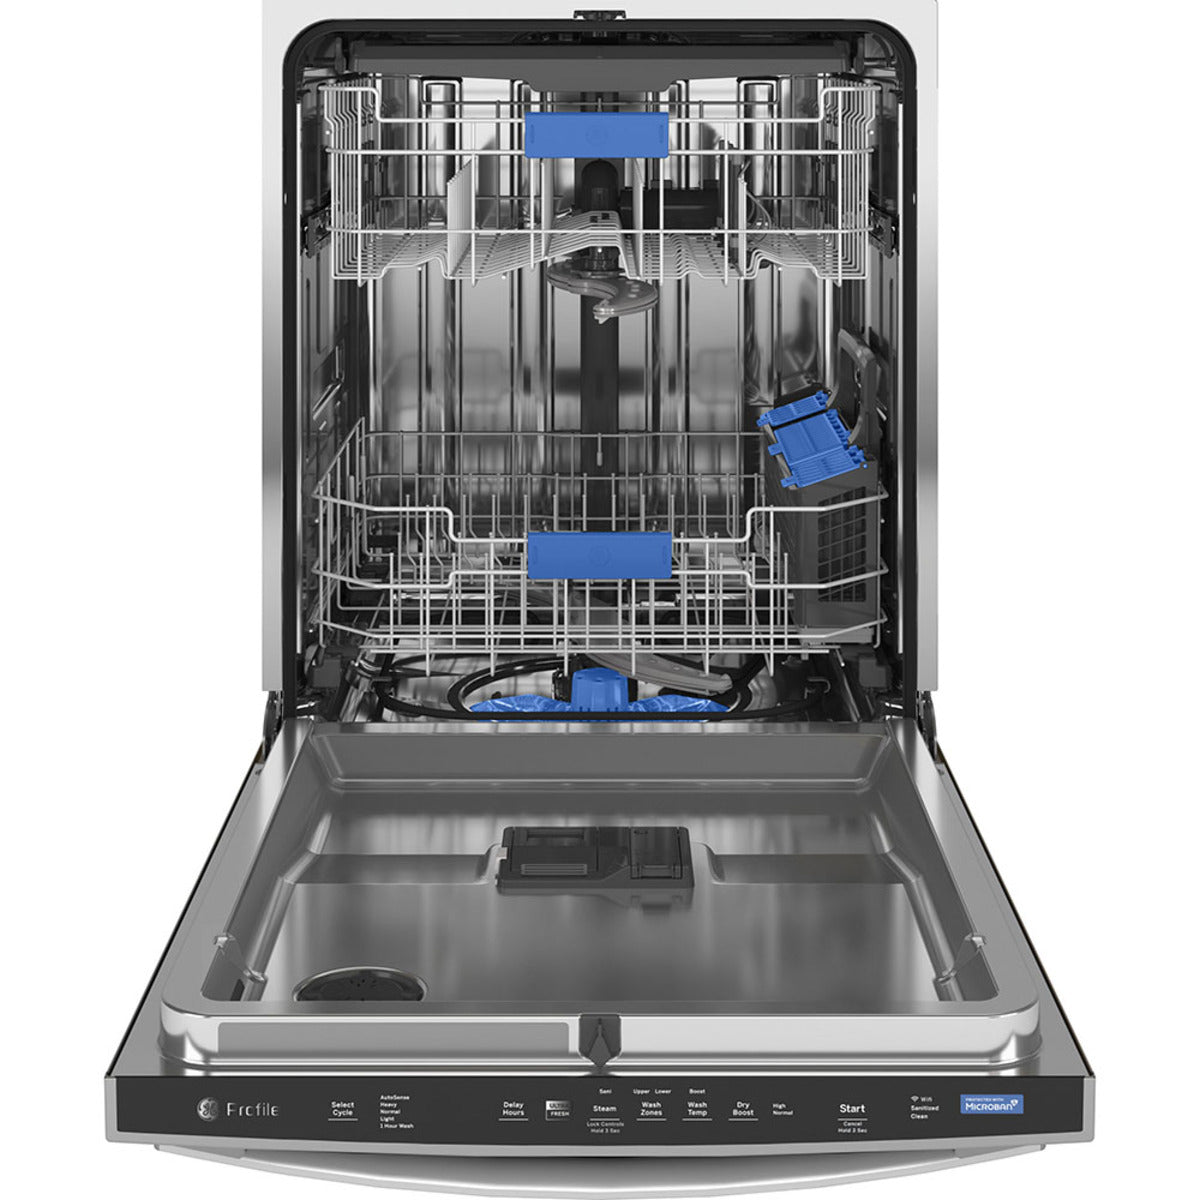 GE Profile - 45 dBA Built In Dishwasher in Grey - PBT865SMPES